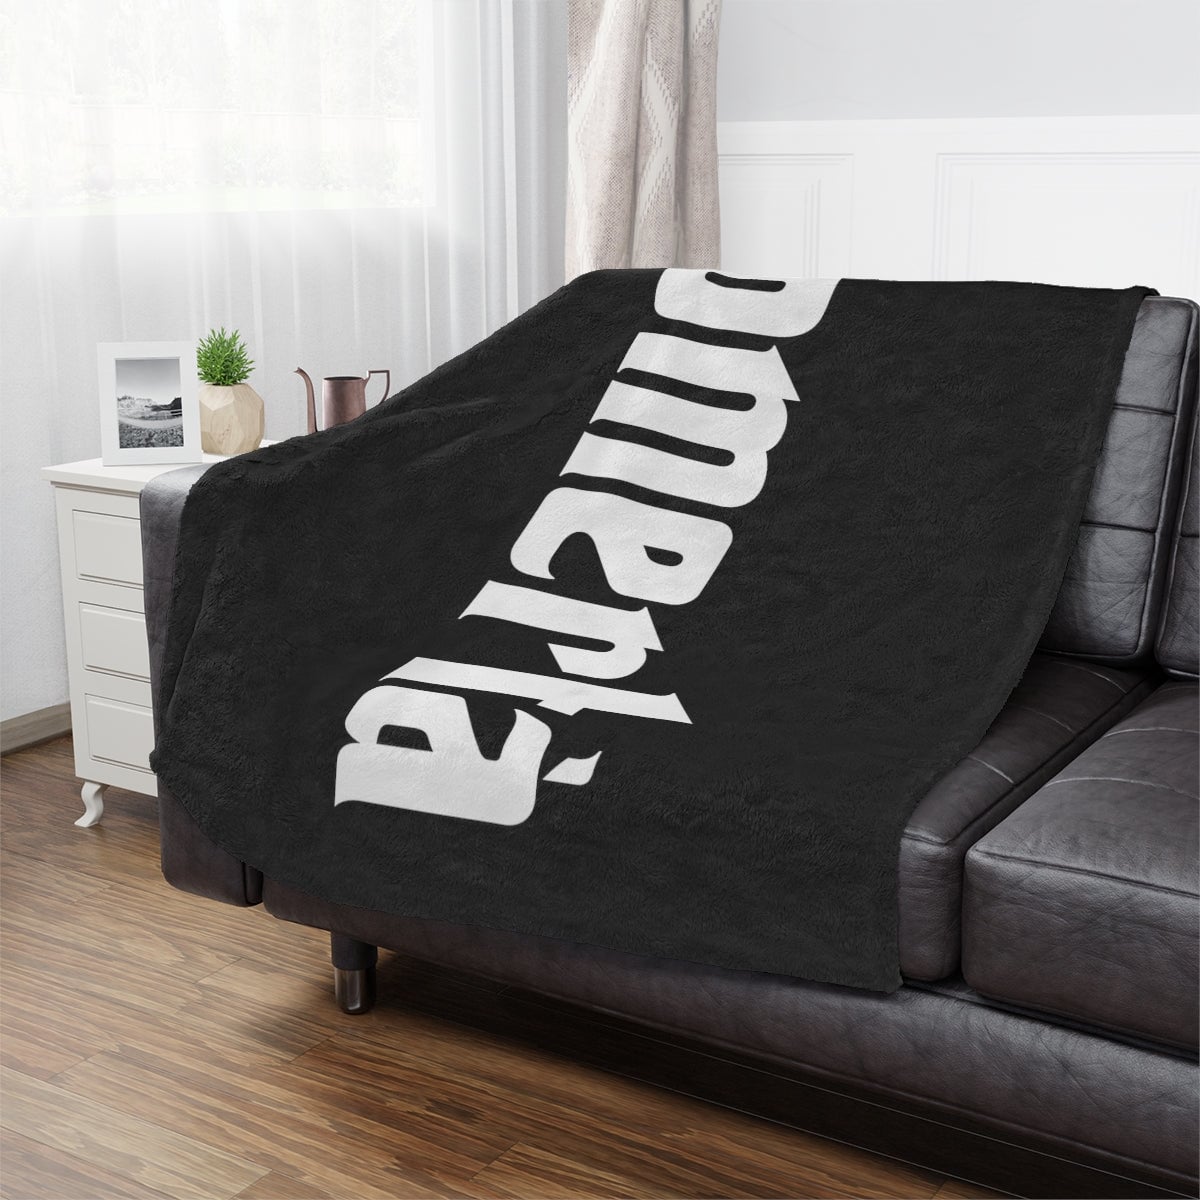 Luxurious Mobster Throw - Omertà Code of Silence for Cozy Home Decor